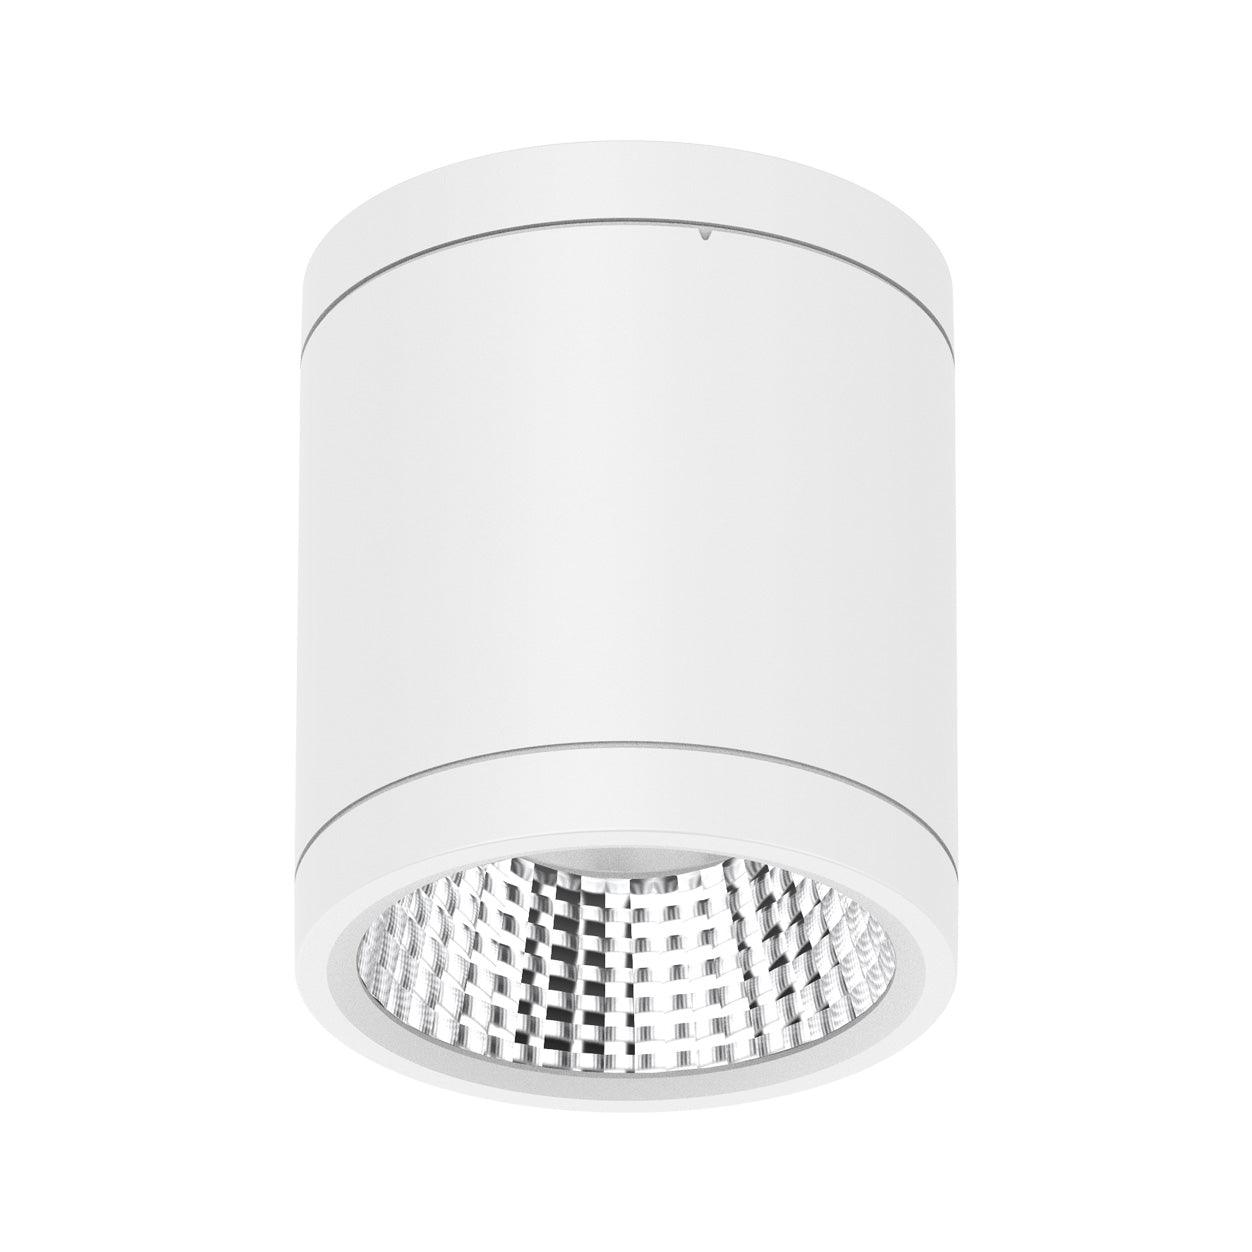 Domus Lighting LED Downlights 13W / WHITE Domus Neo-Pro Surface Mounted Downlight Lights-For-You 20891